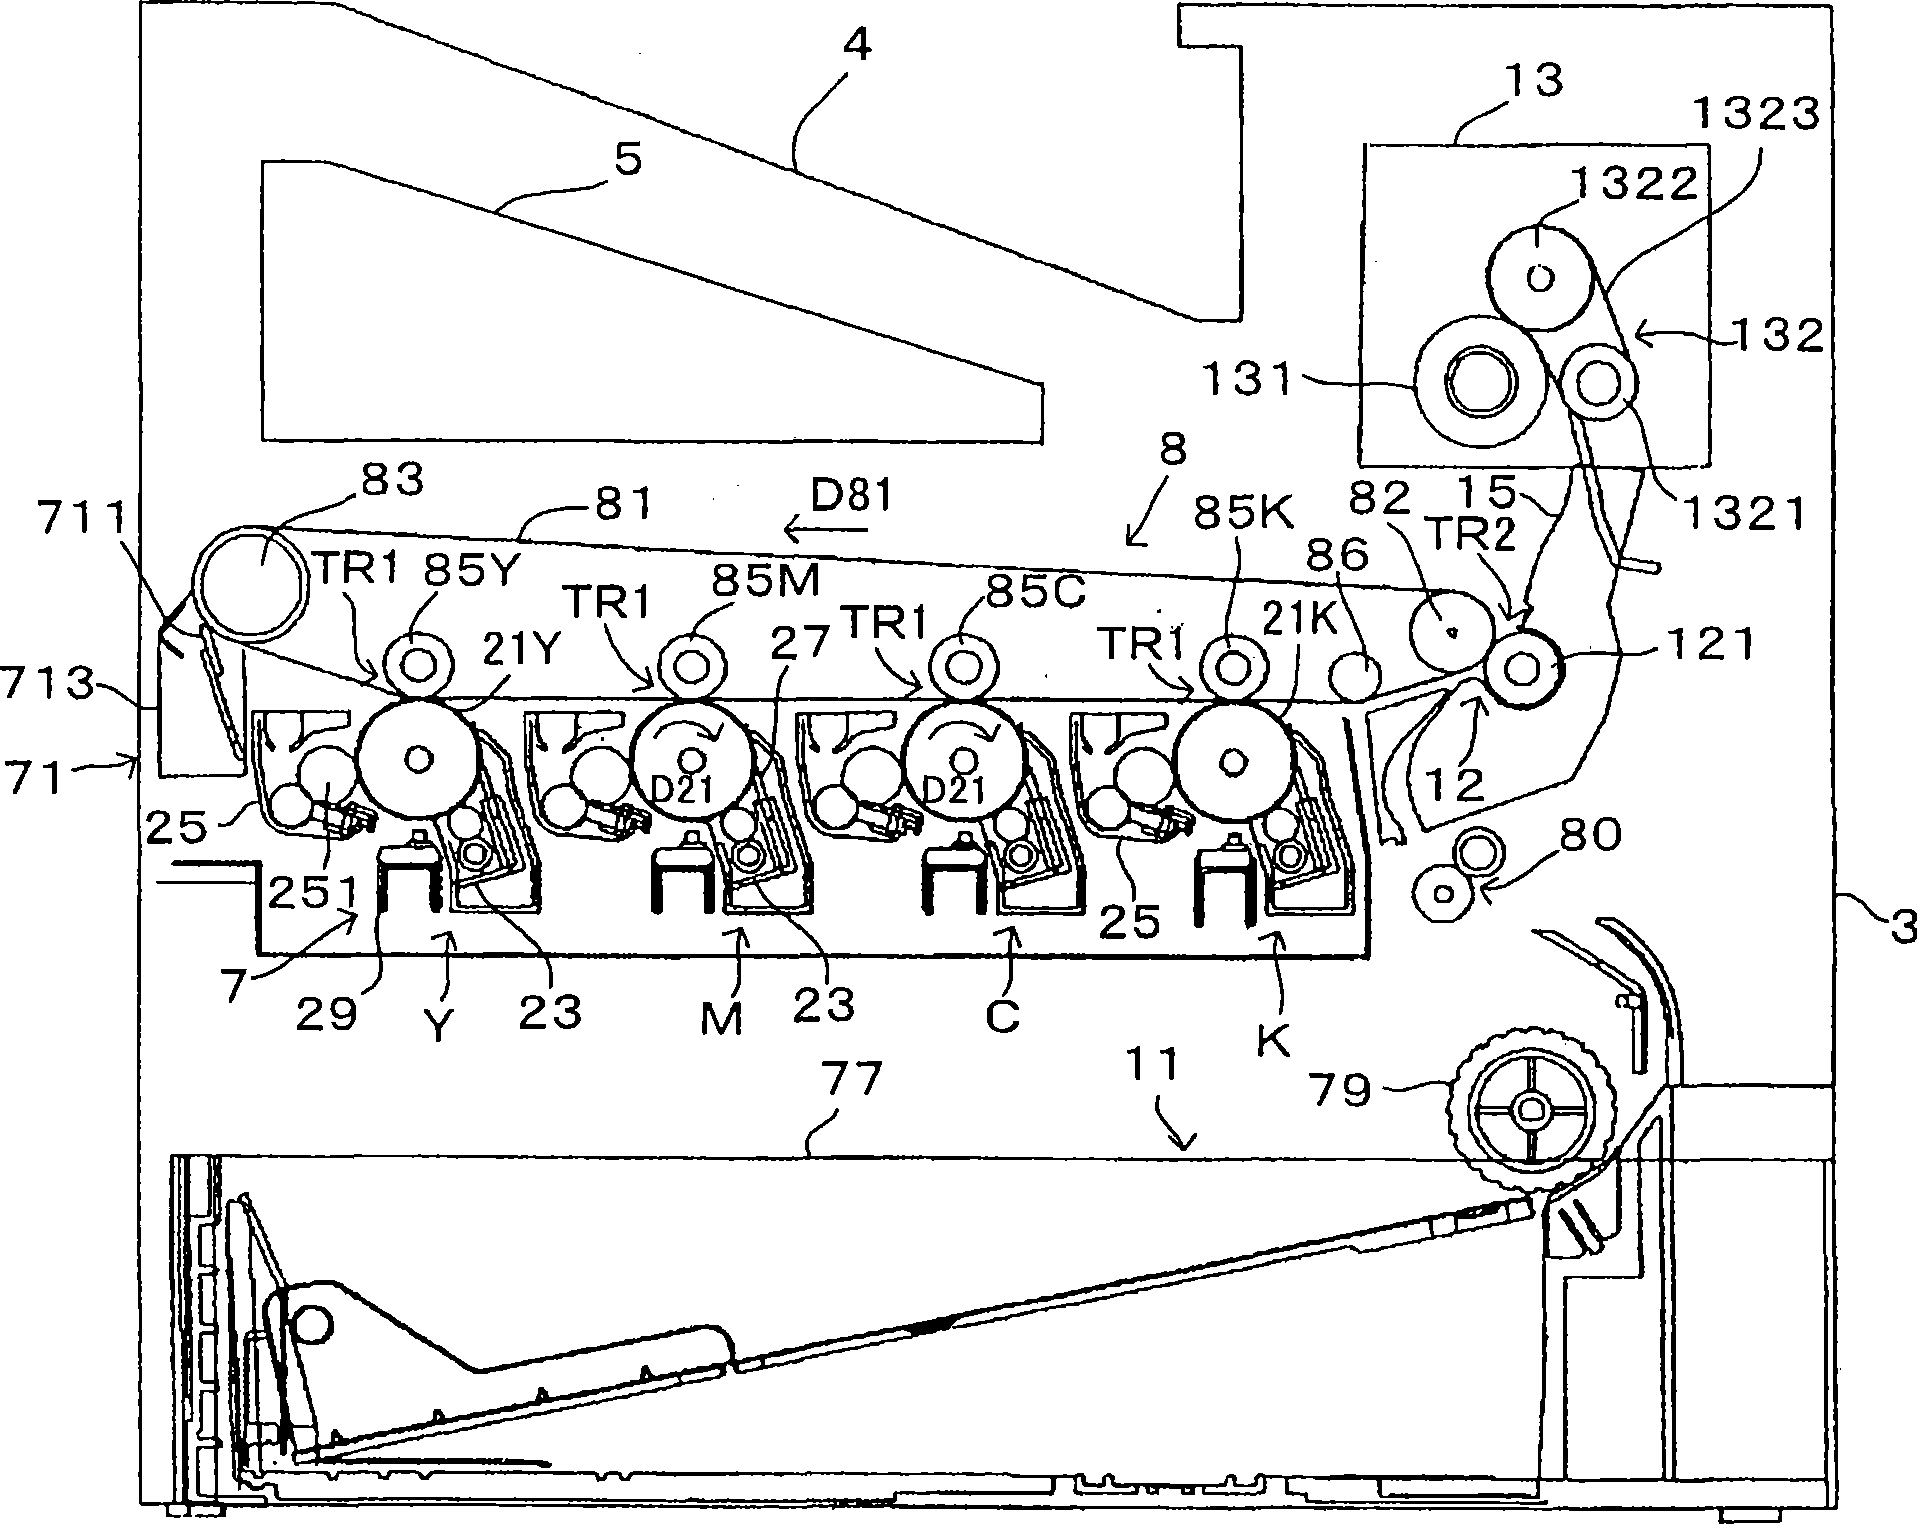 An exposure head and an image forming apparatus